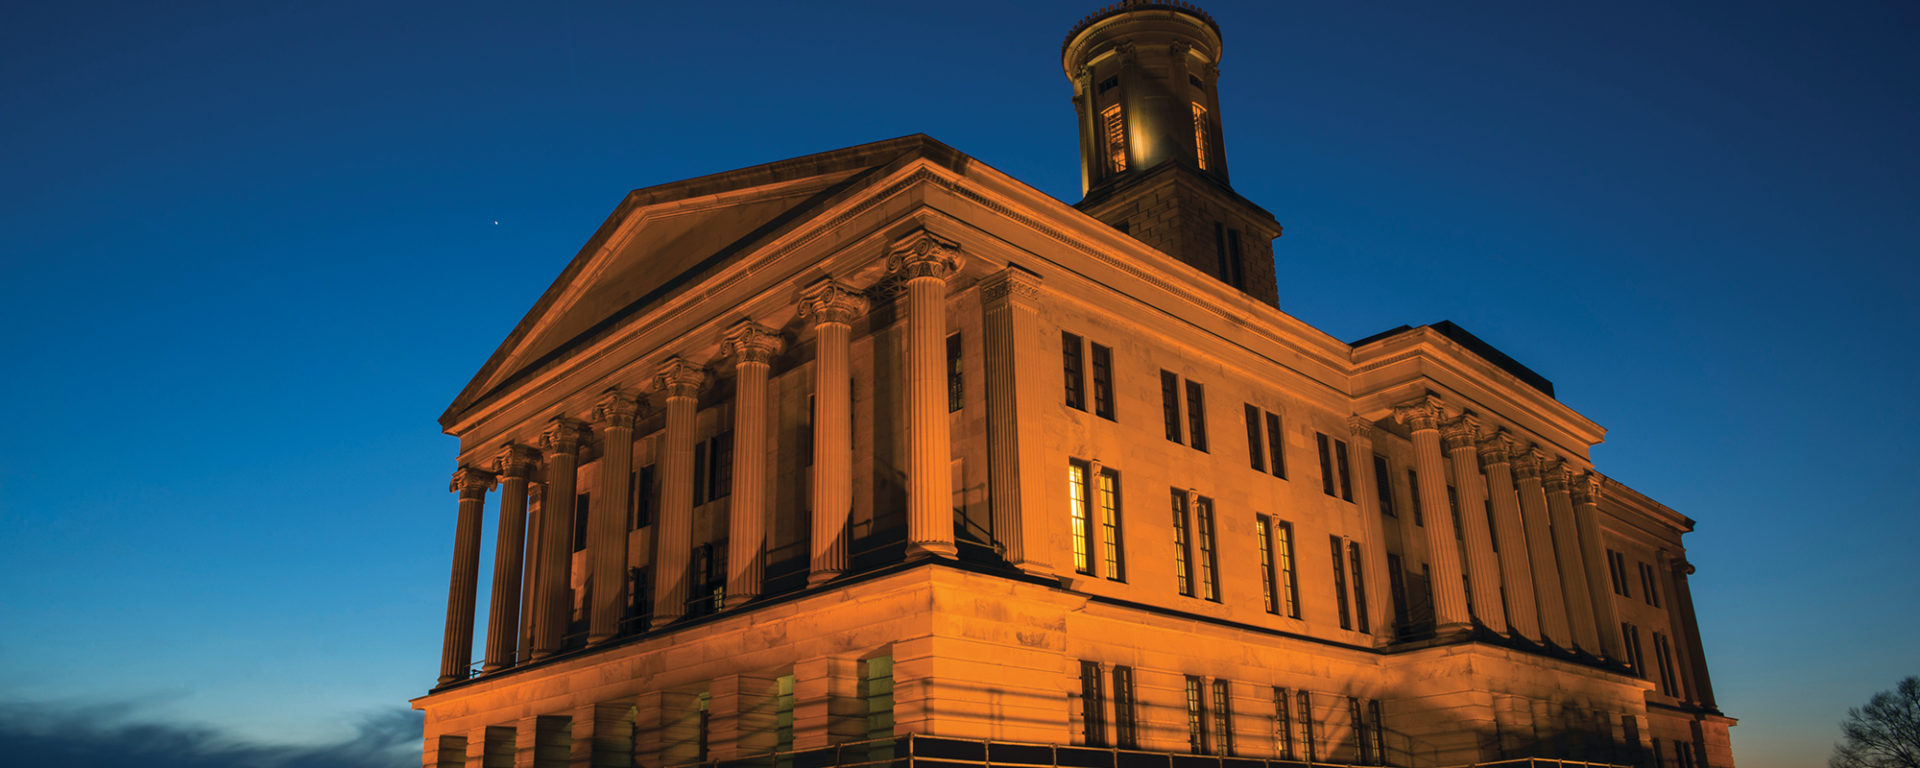 The Tennessee state Capitol building, lit at night